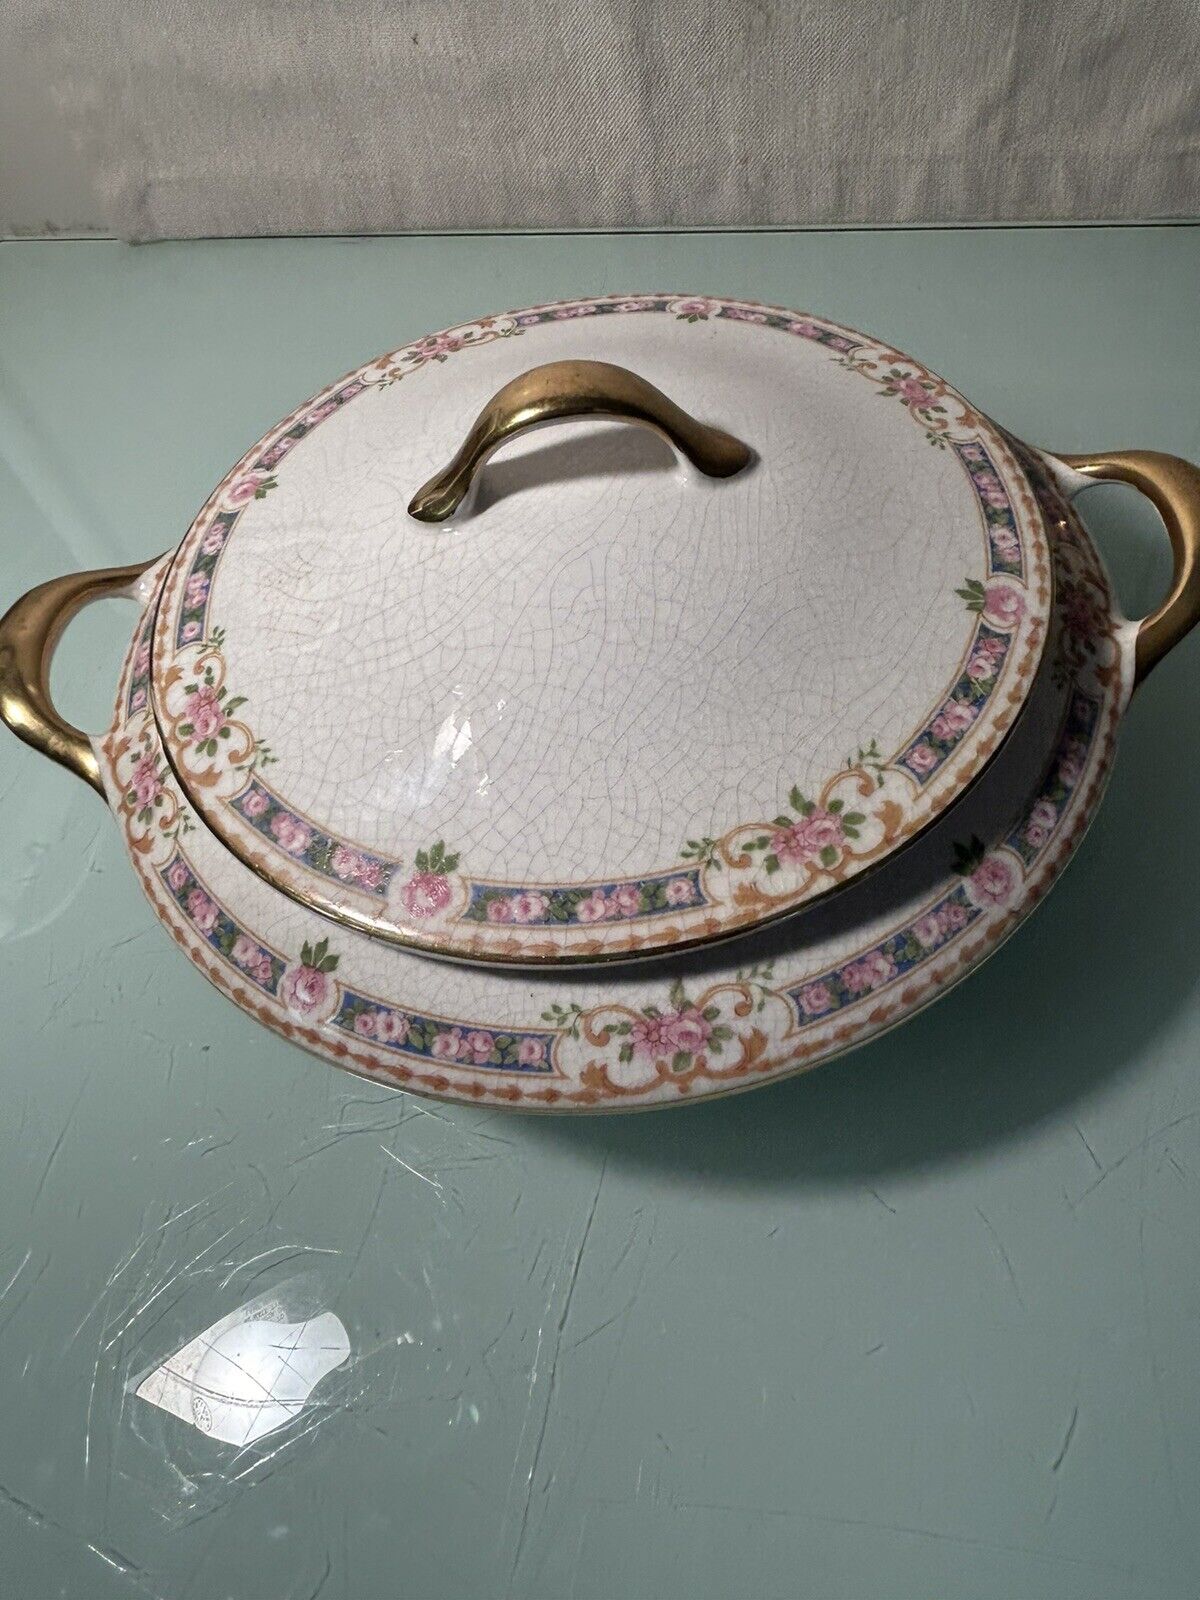 Vintage 1929 Canonsburg Pottery Round Covered Dish With Pink Flowers & Gold Trim